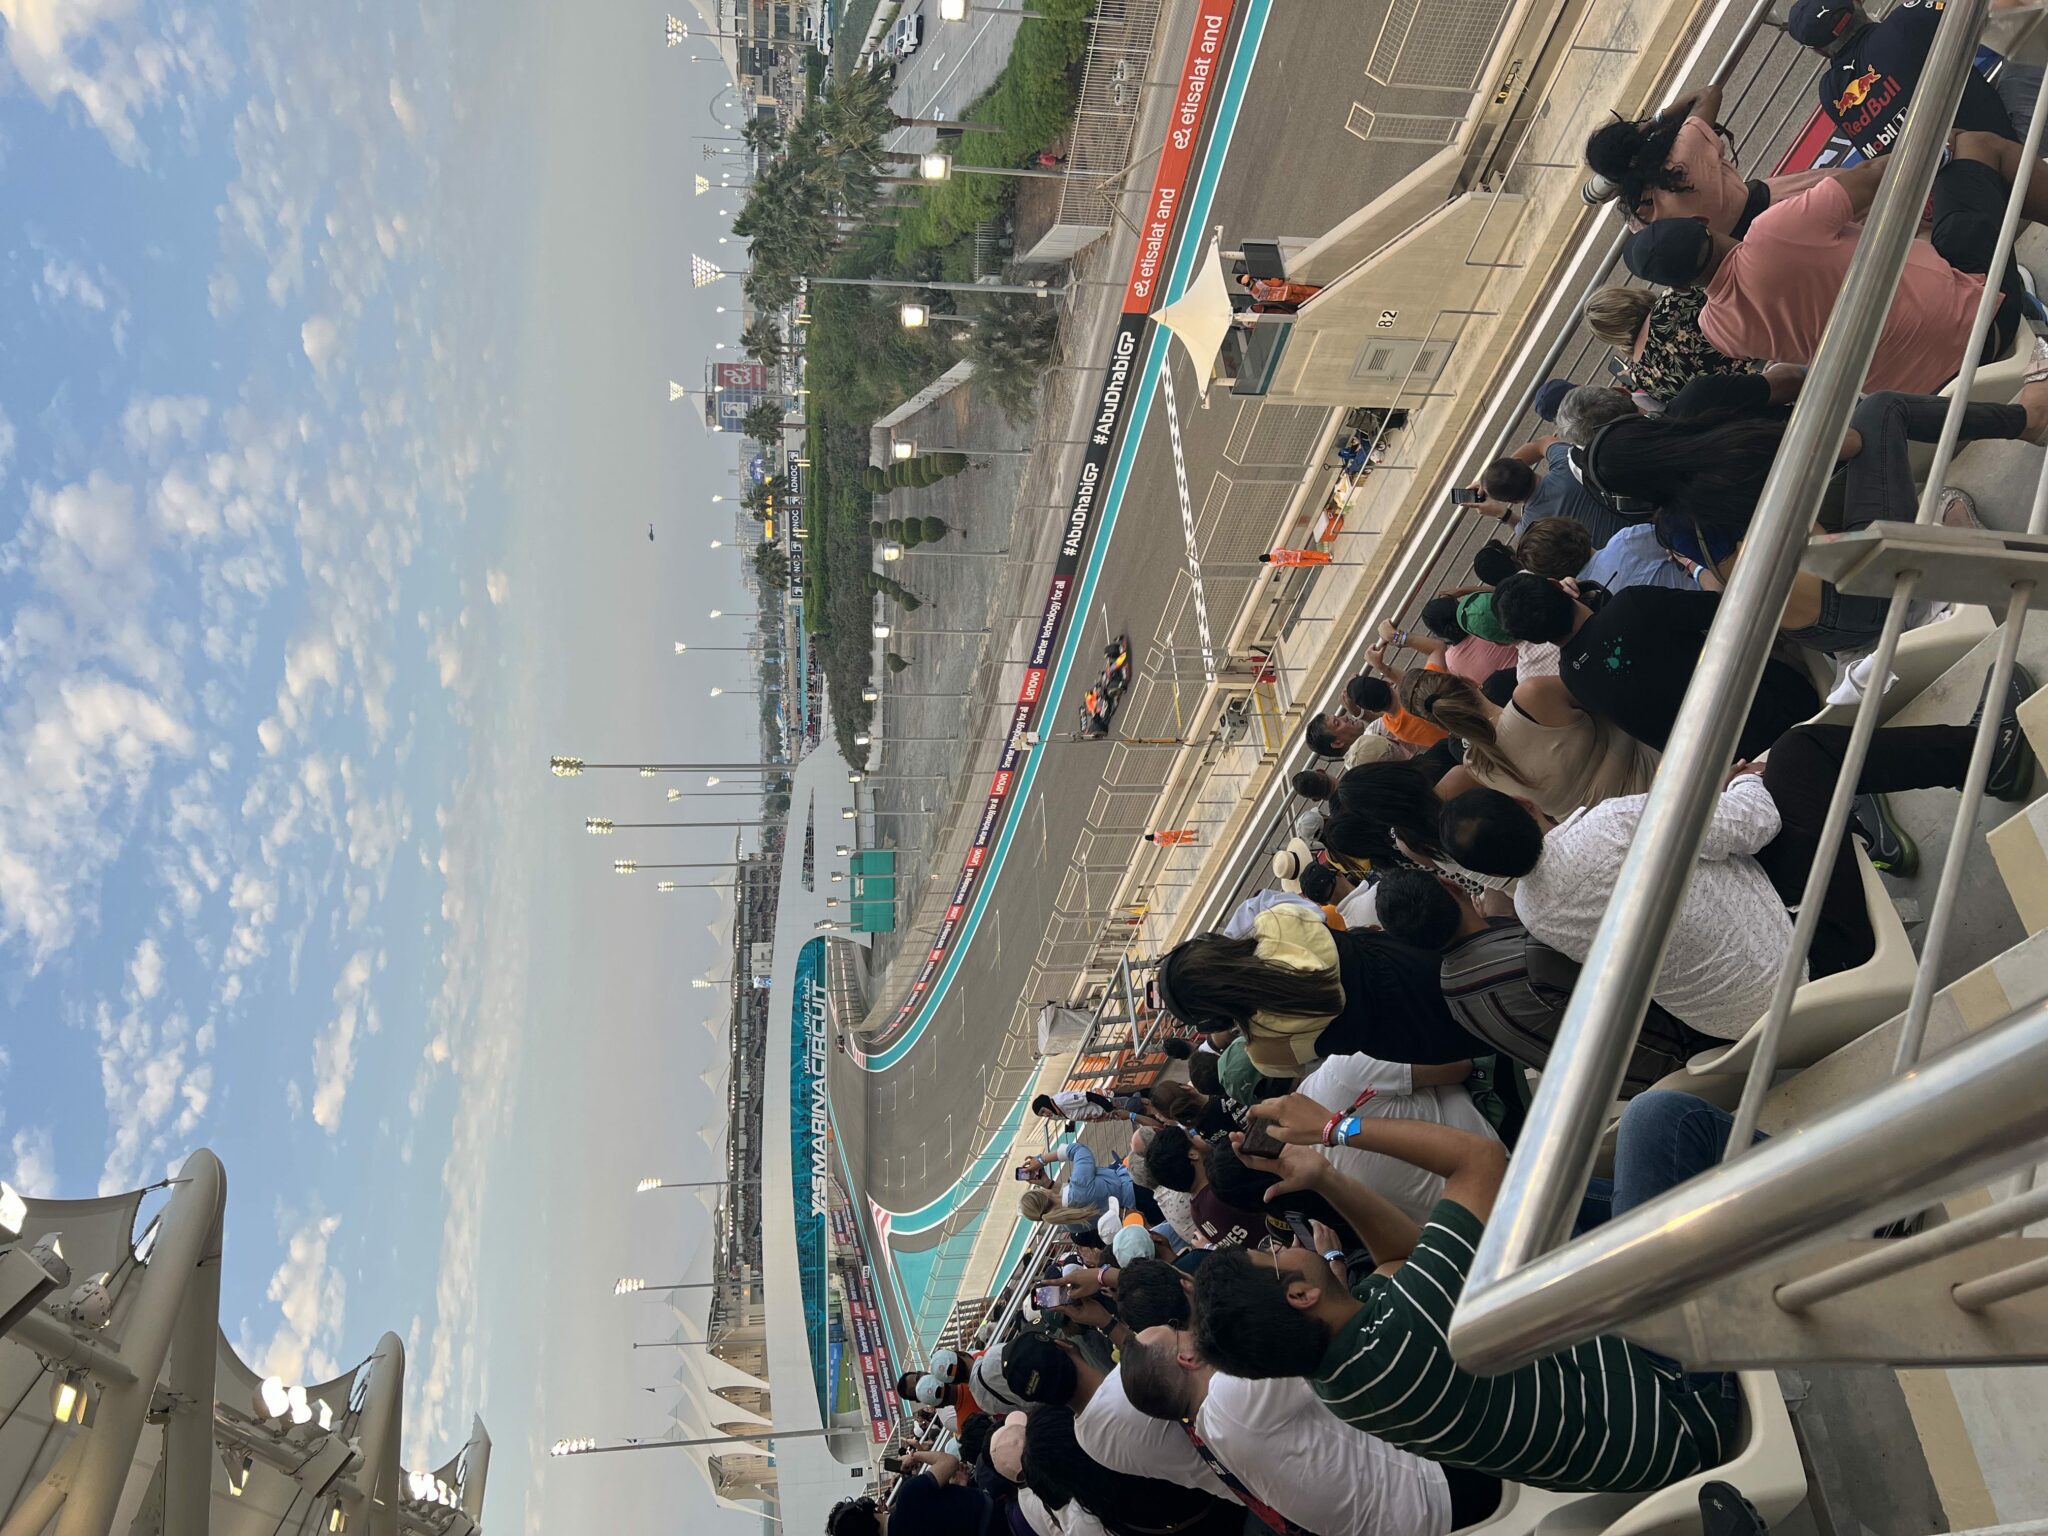 Image of the race track at Yas Marina Circuit